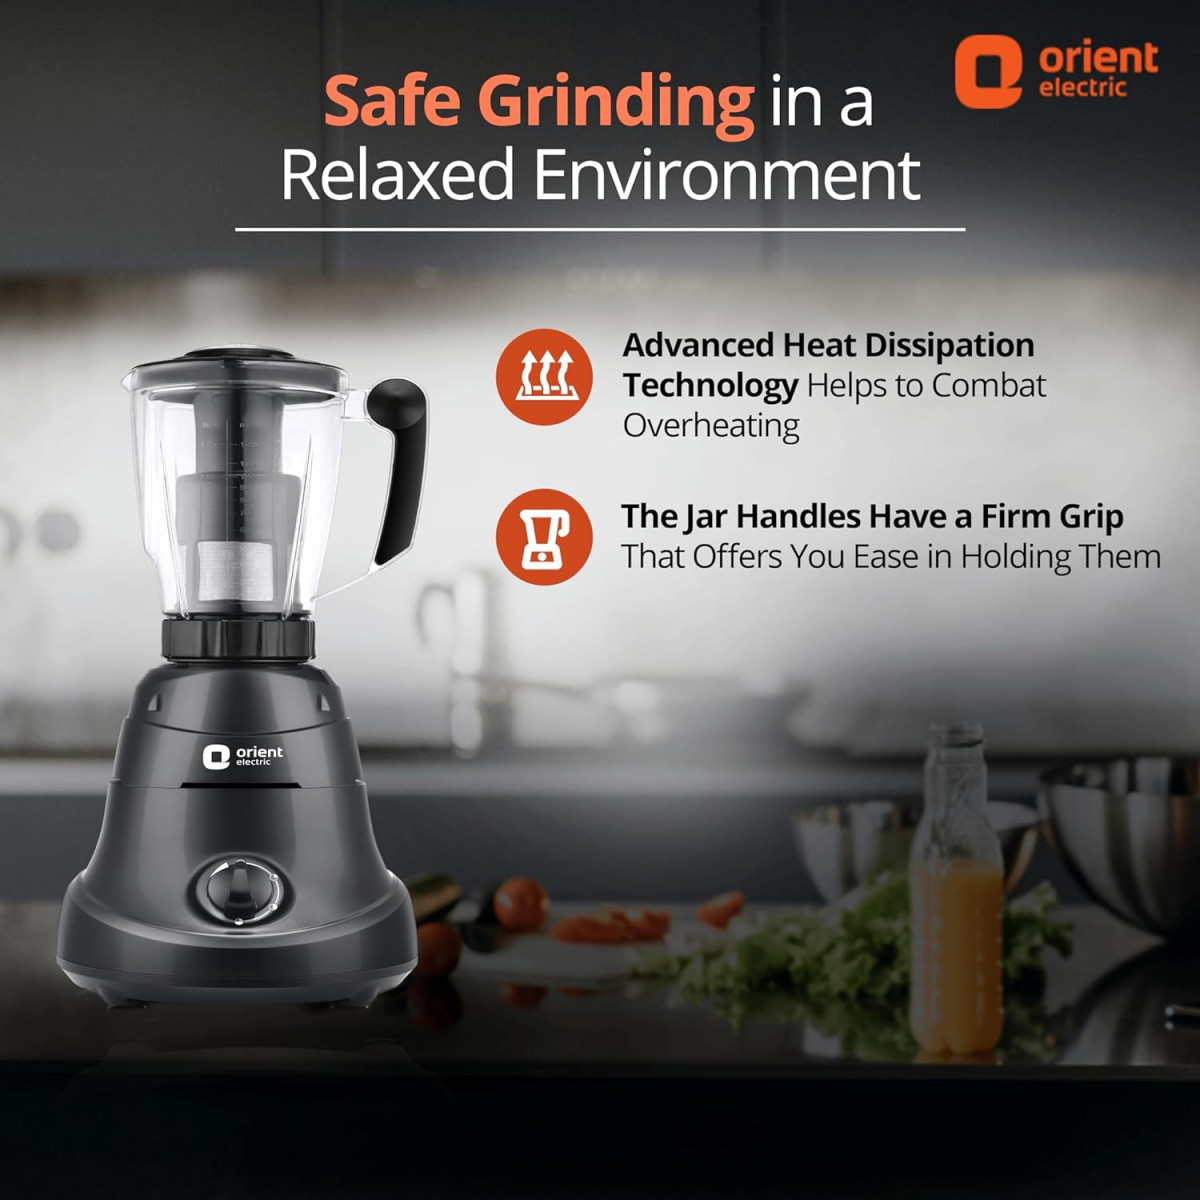 Orient Electric 750W Mixer Grinder with Juicer  Super Power 750 MGSP75B4 4 jar with 3 SS Jars and 1 PC juicing jar with Seive  Longer Life Balanced Coil Motor 5 Years Motor Warranty